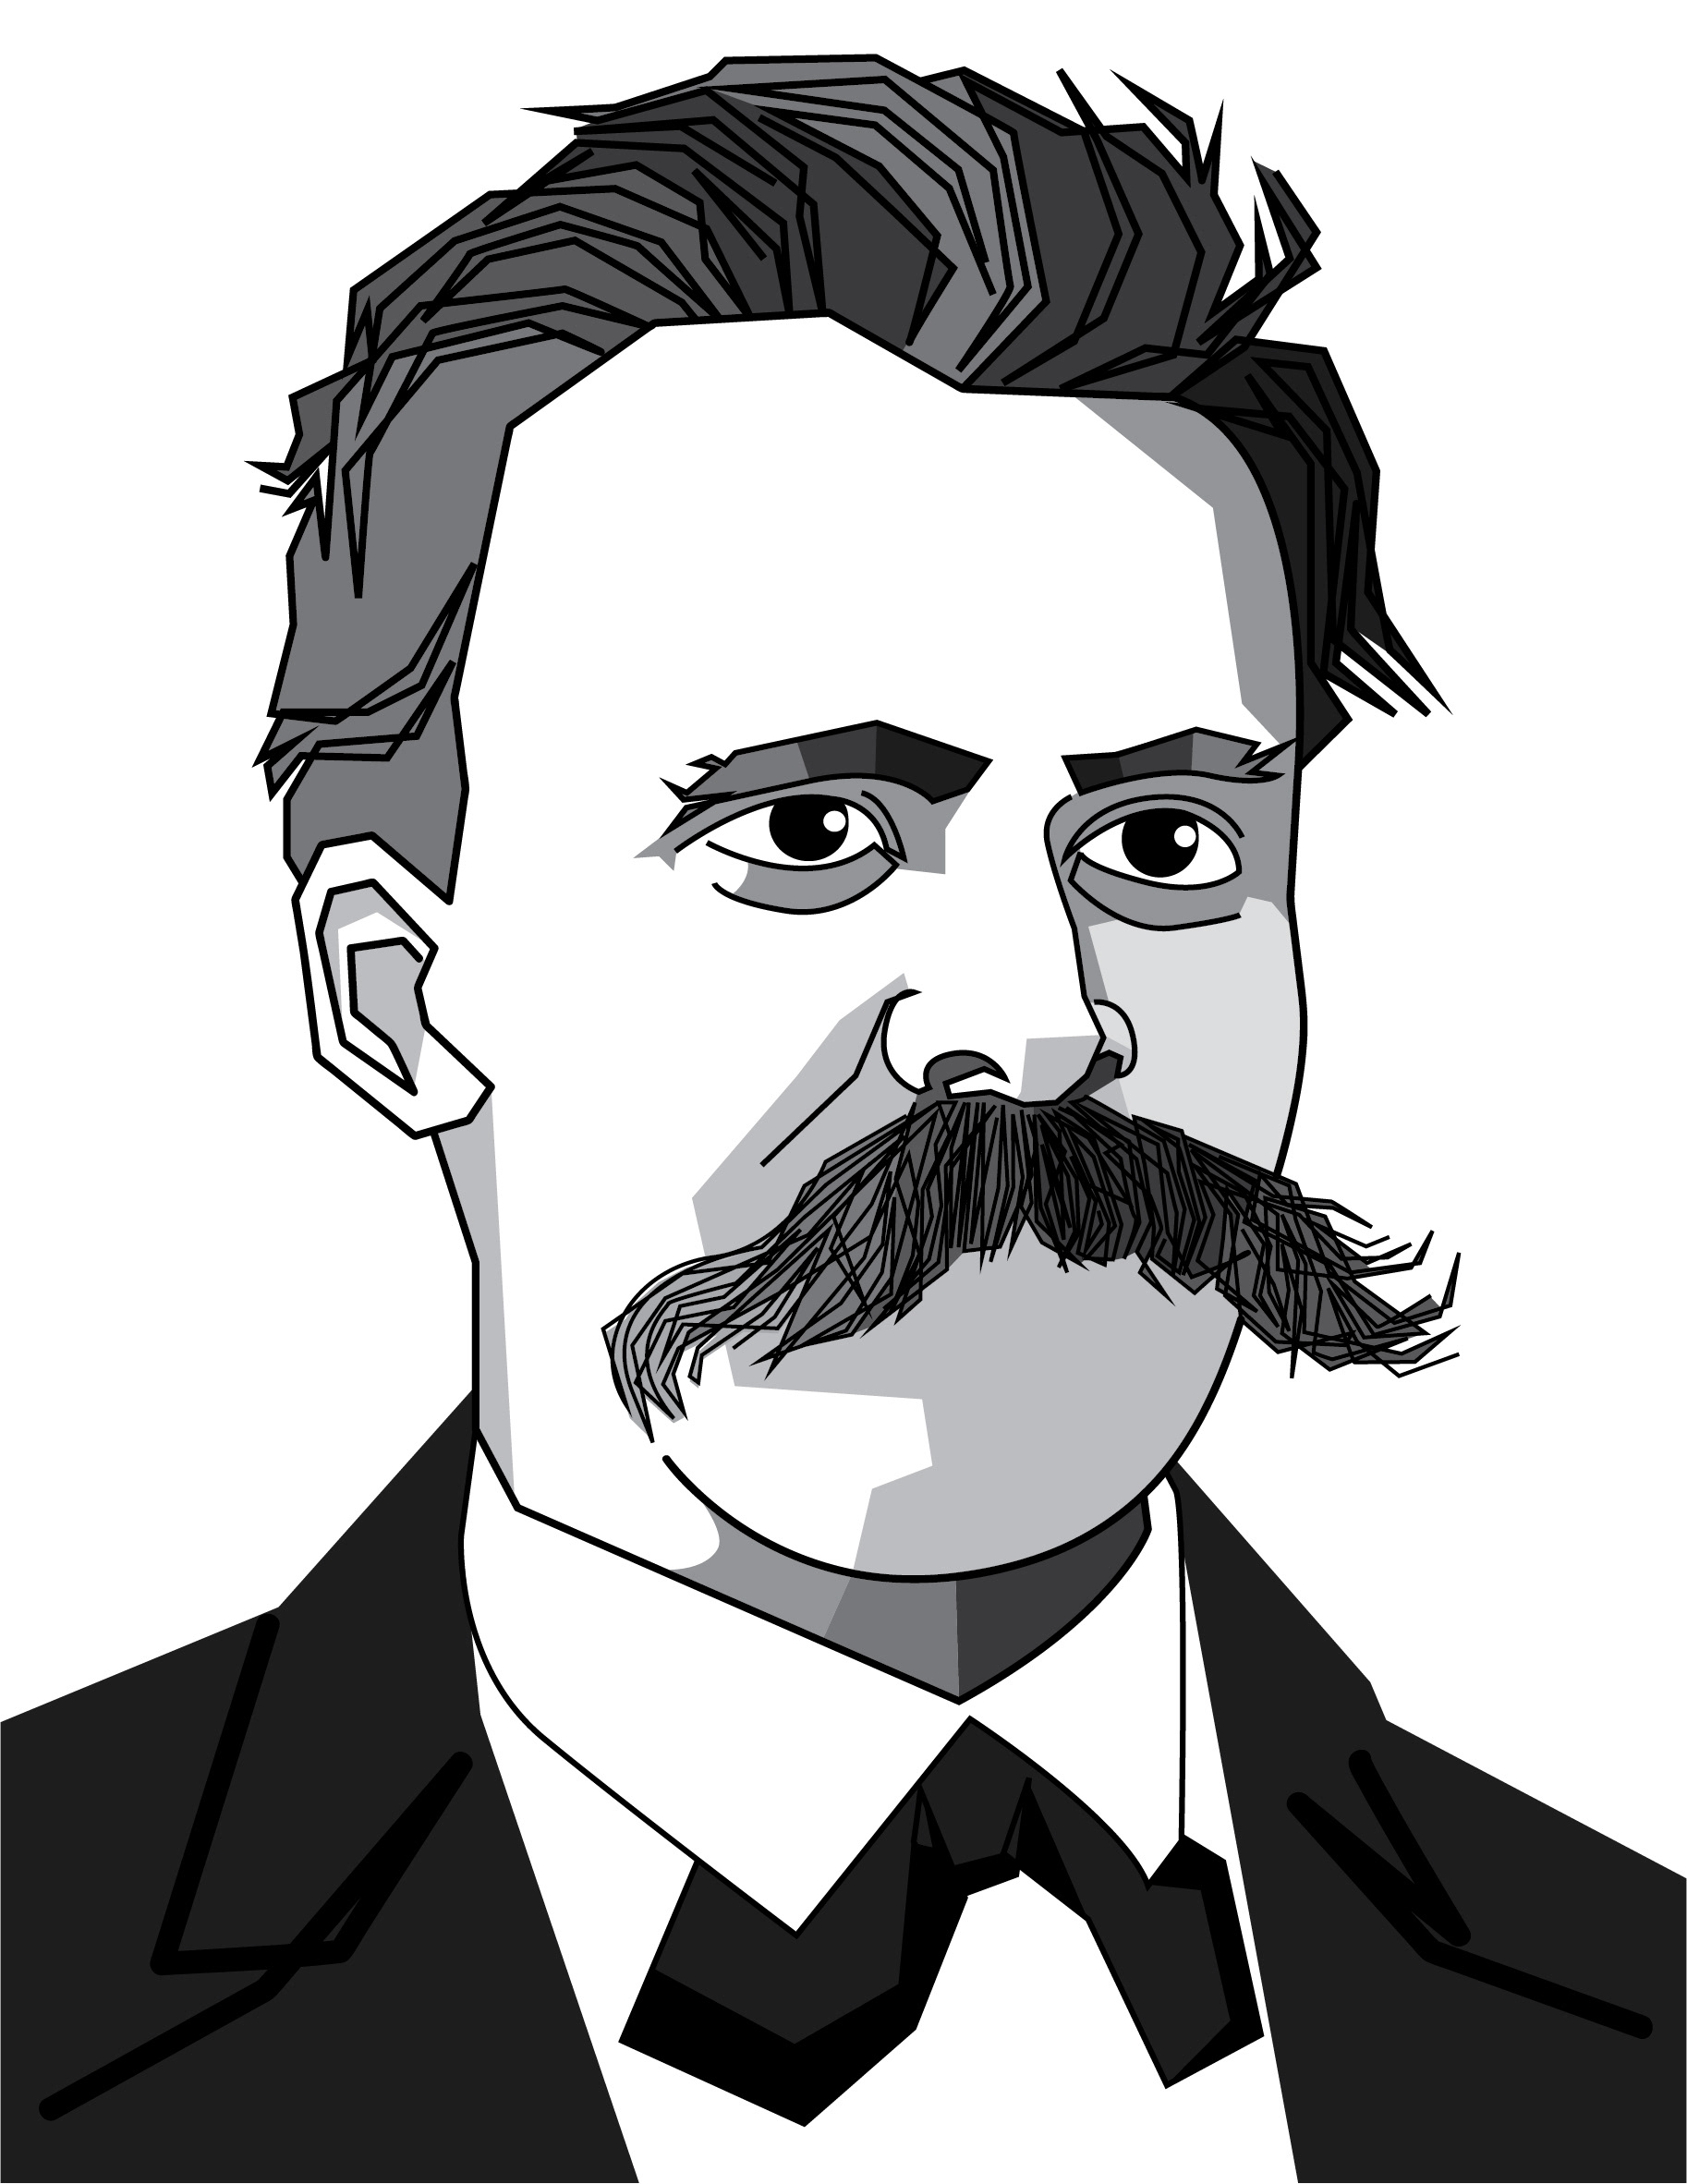 ion andrei puican - A series of vector portraits